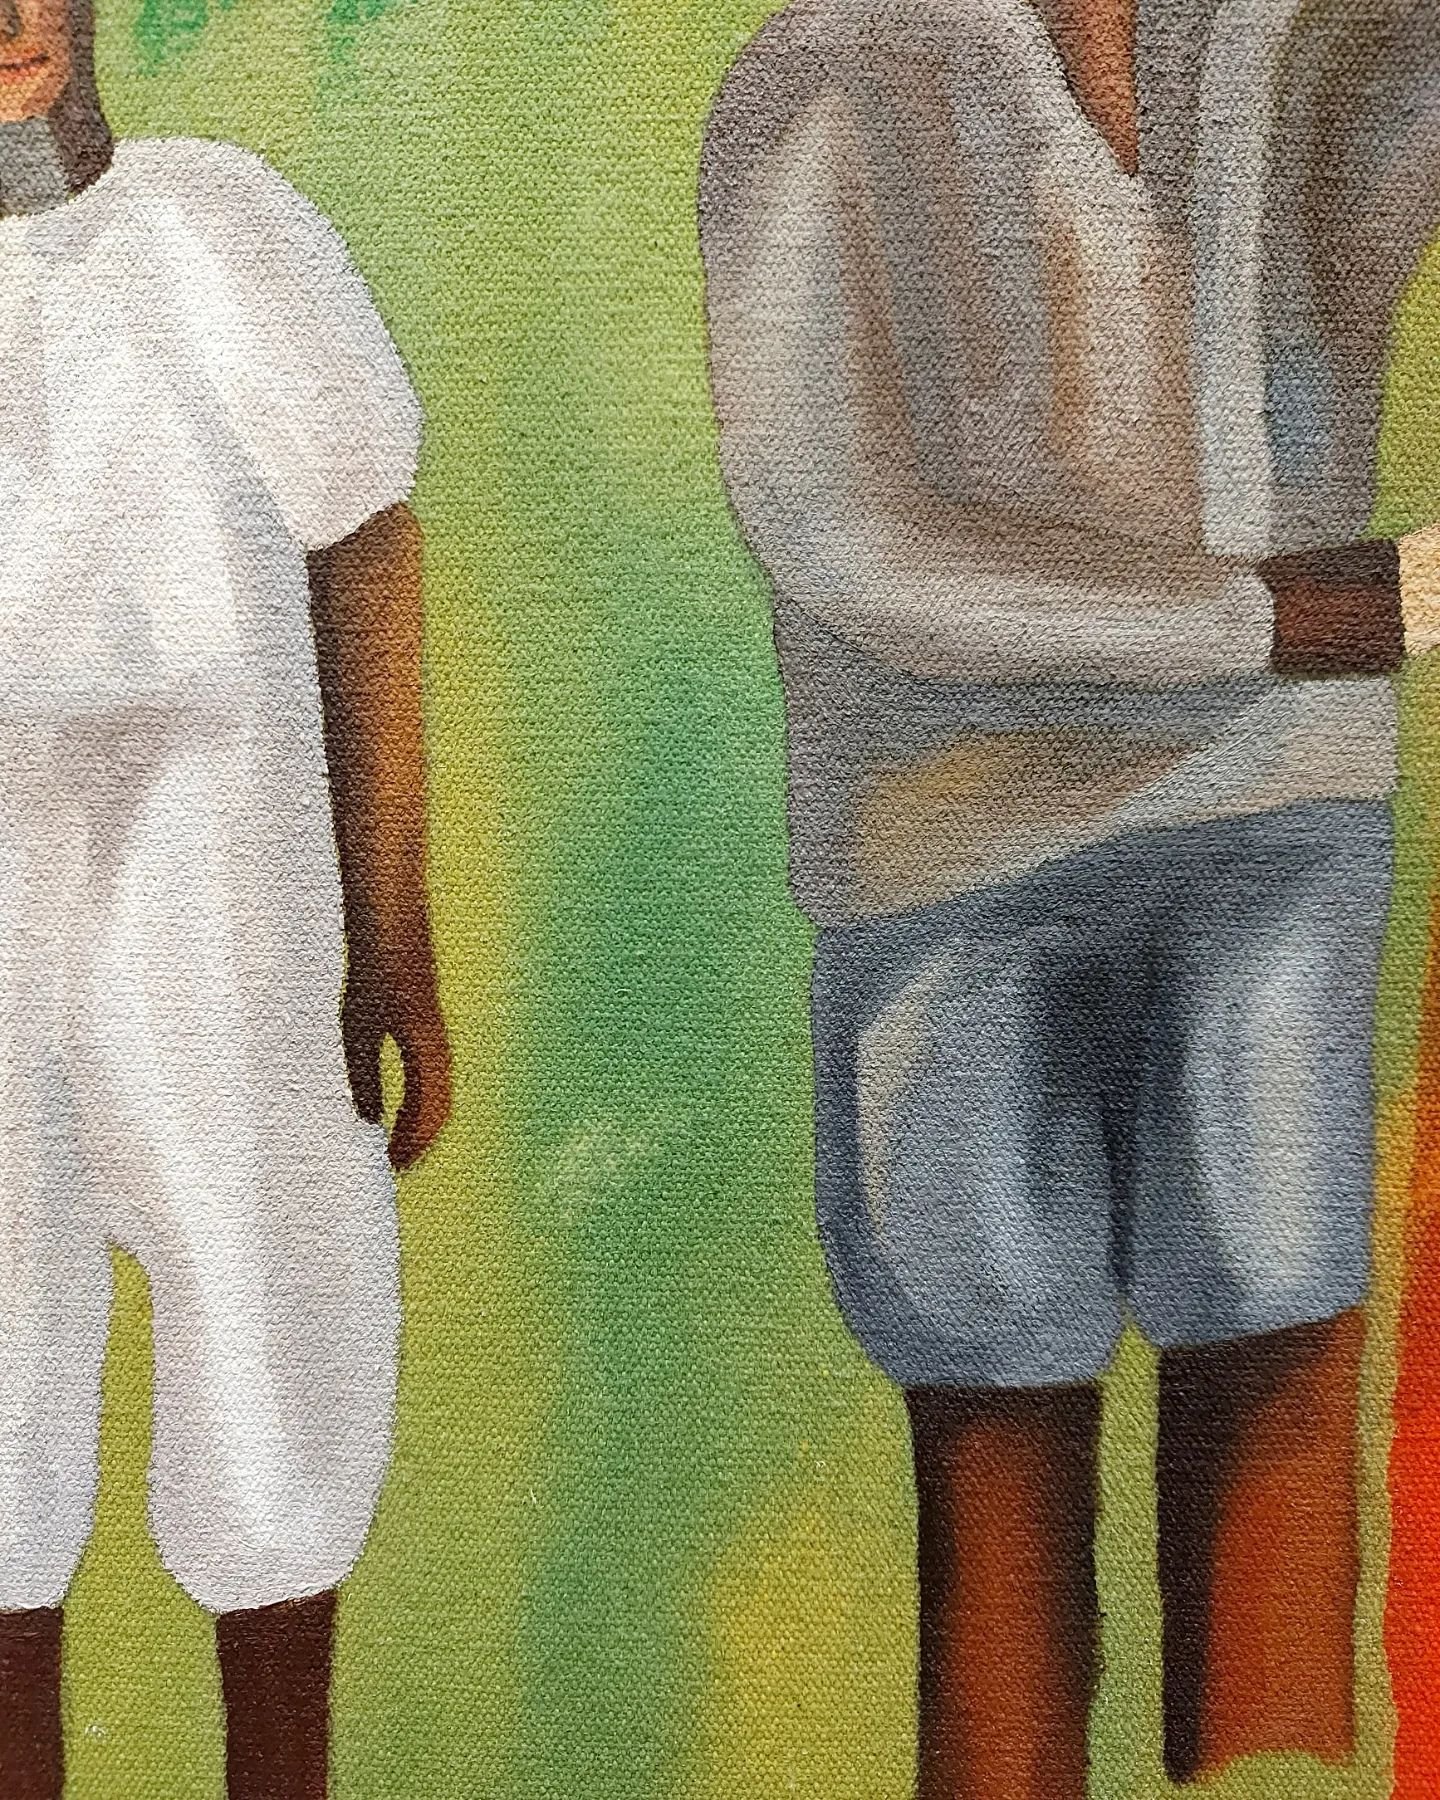 Work in progress detail of the oil painting I'm currently working on. 🌴💛🖌🕊

#liesabacchusart #oilsoncanvas #wipart #abstractfigurativepainting #contemporarypainting #sfsa #mhoilpaints #diasporicart